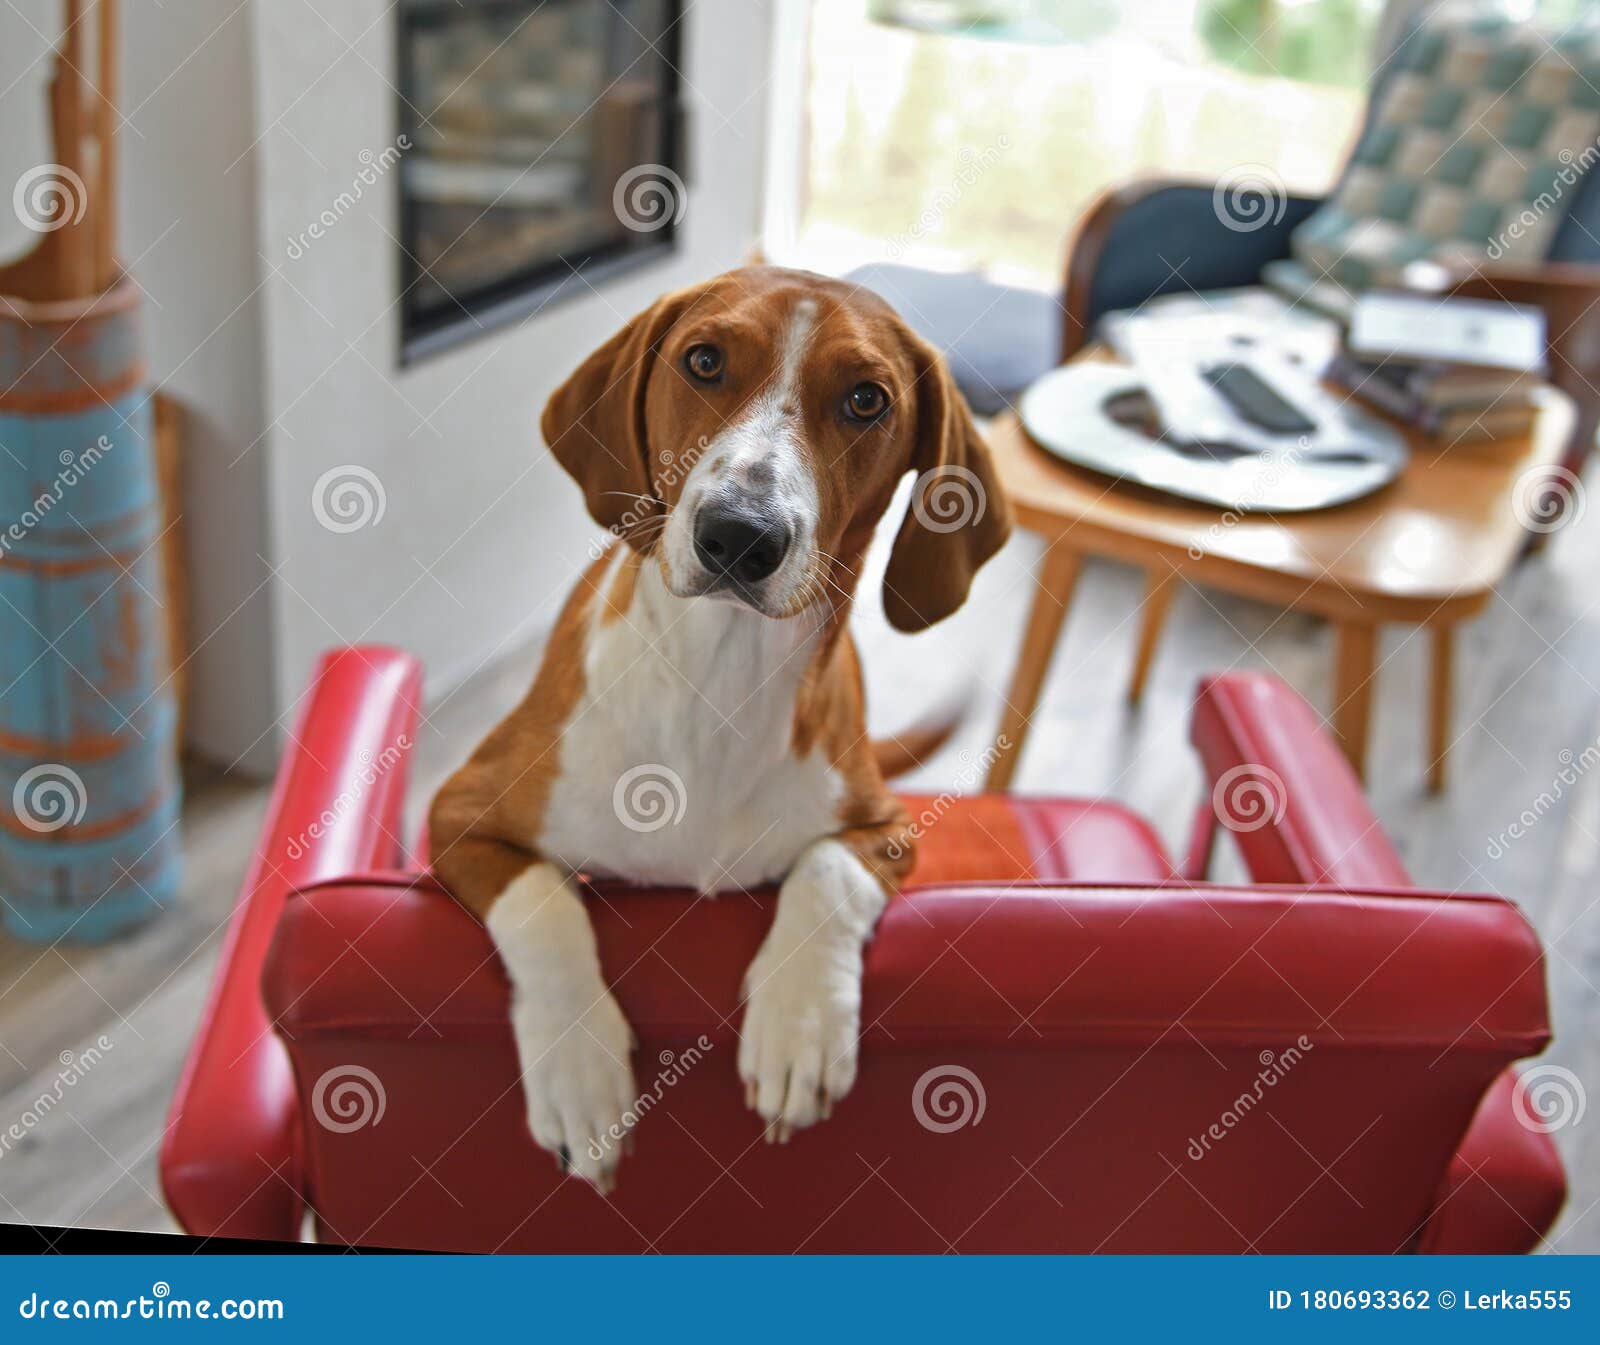 Drever Breed Of Dog Short Legged Scenthound From Sweden Used For Hunting Deer And Other Game Dog Is Standing On Red Armchair Stock Photo Image Of Northern Long 180693362